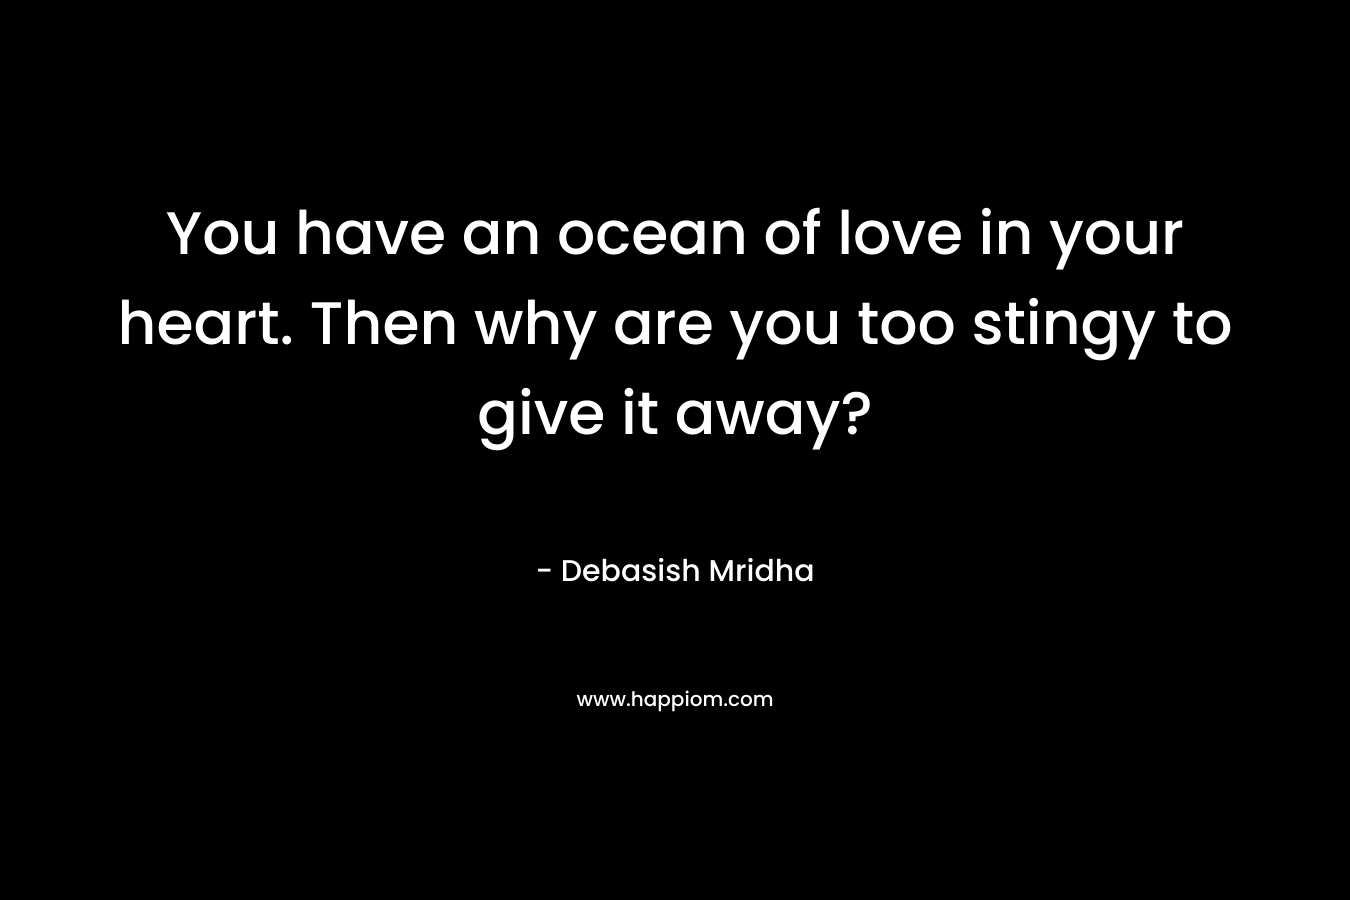 You have an ocean of love in your heart. Then why are you too stingy to give it away? – Debasish Mridha